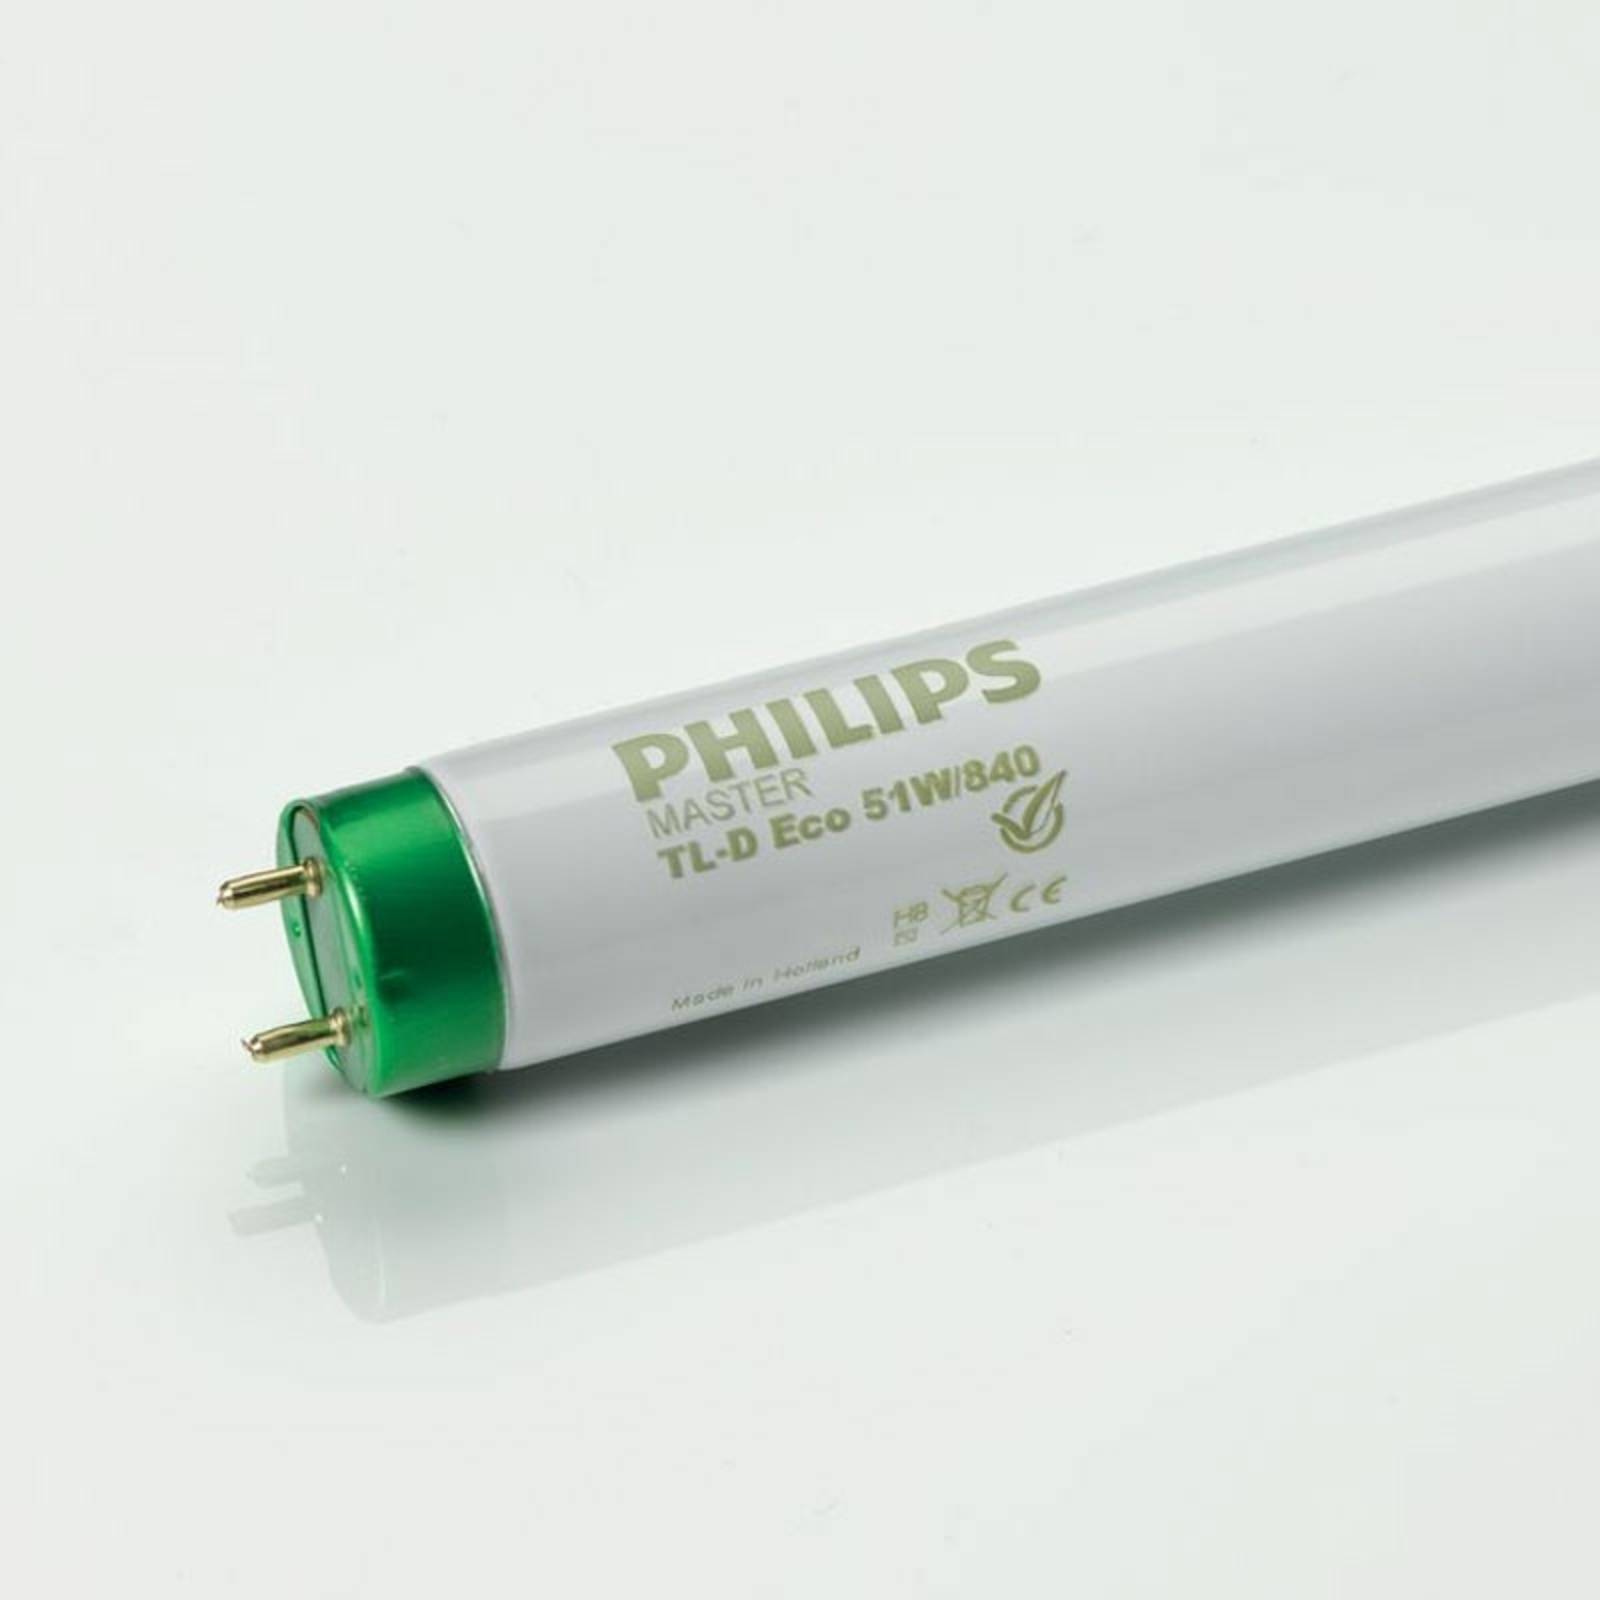 Image of Philips G13 T8 32W 840 Master TL-D Eco 8711500264626